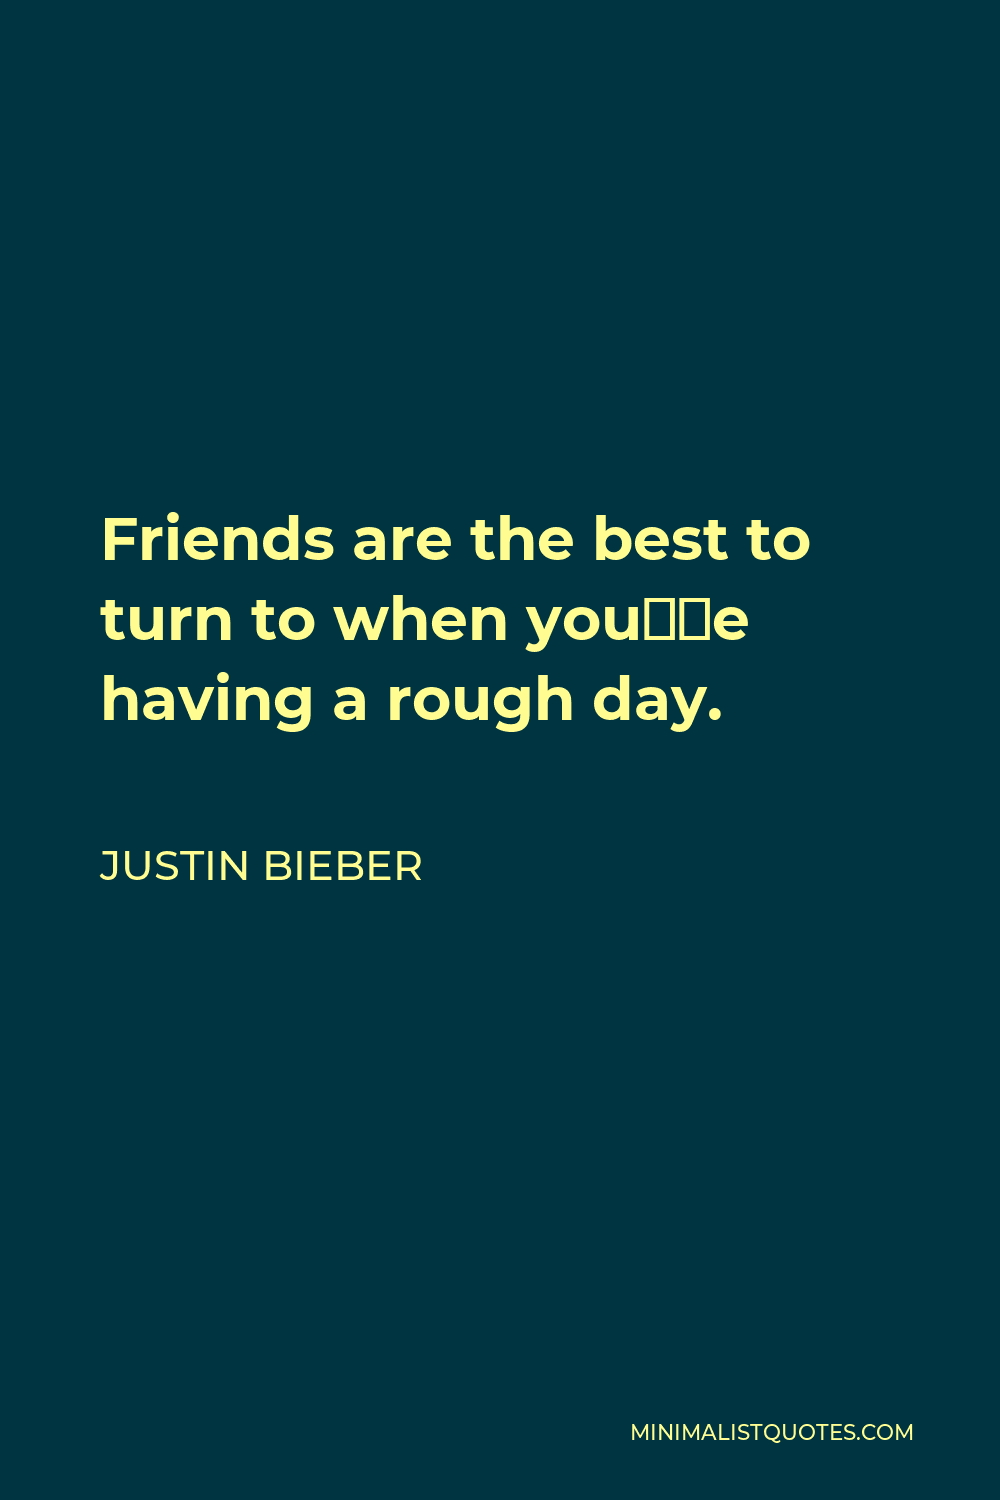 Justin Bieber Quote - Friends are the best to turn to when you’re having a rough day.